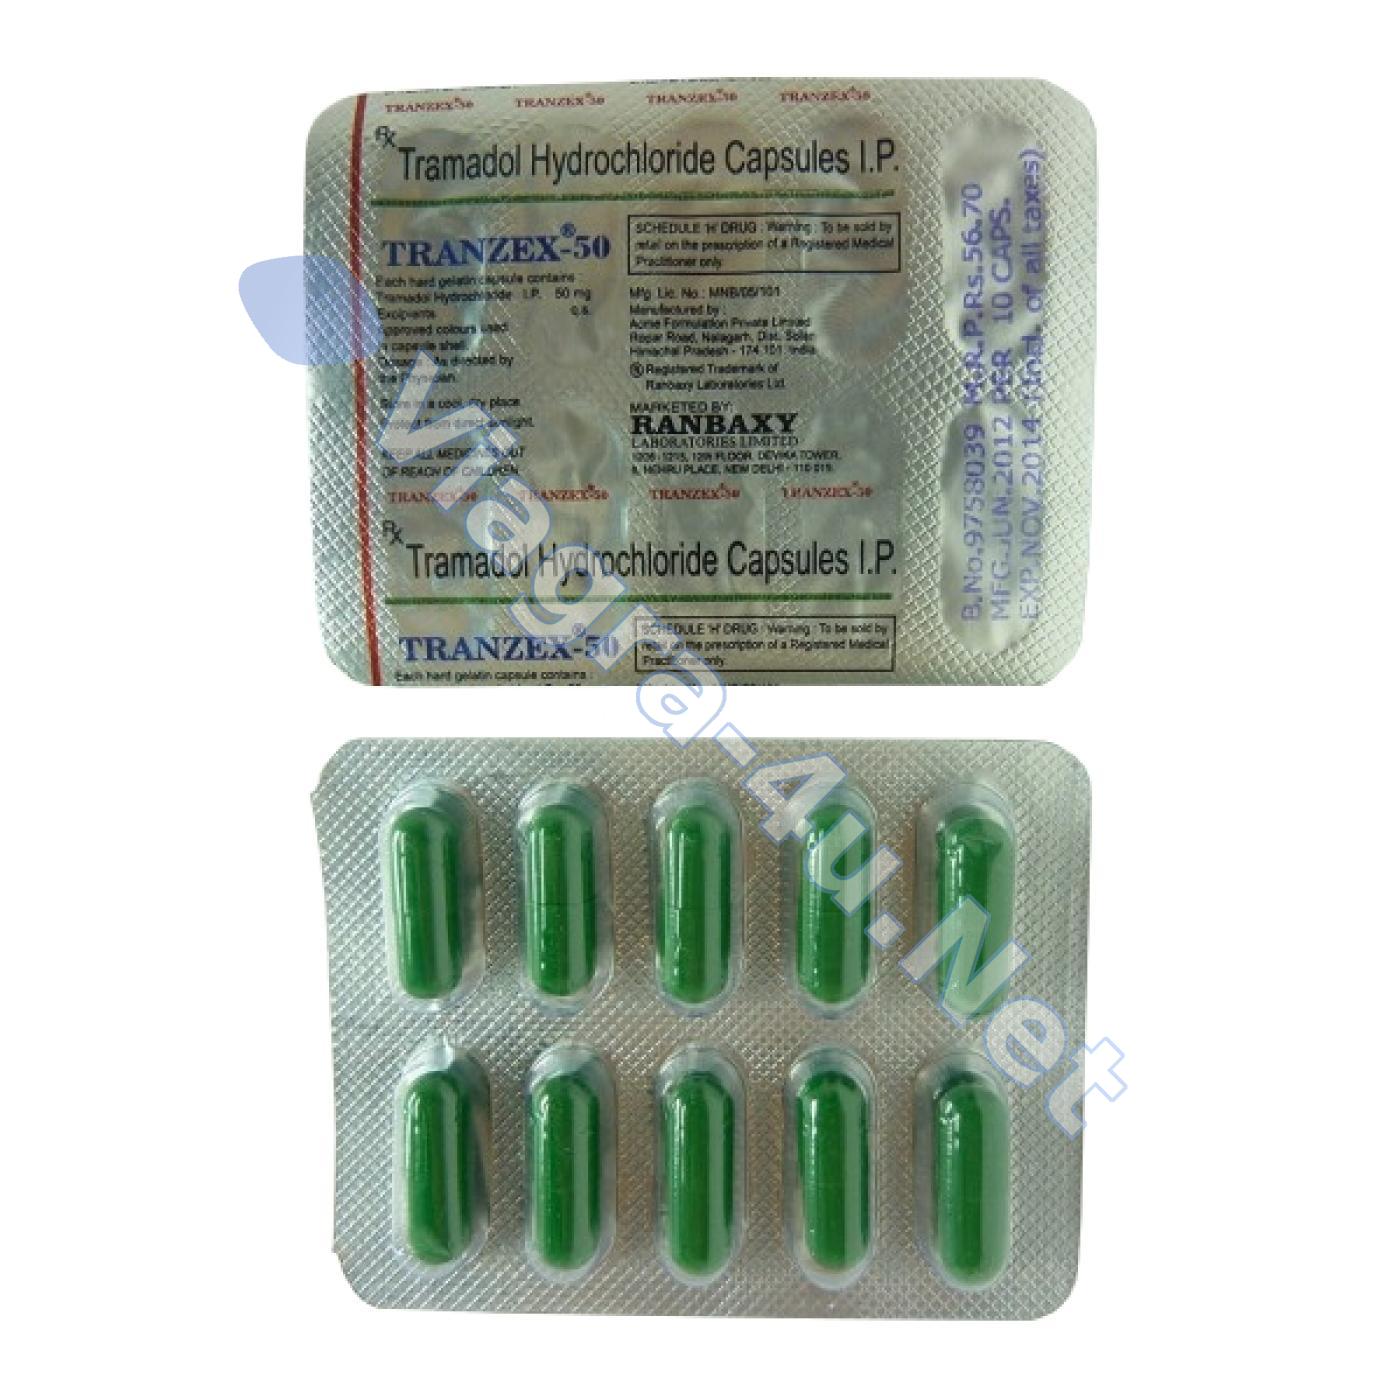 tramadol 50 mg tablets information processing